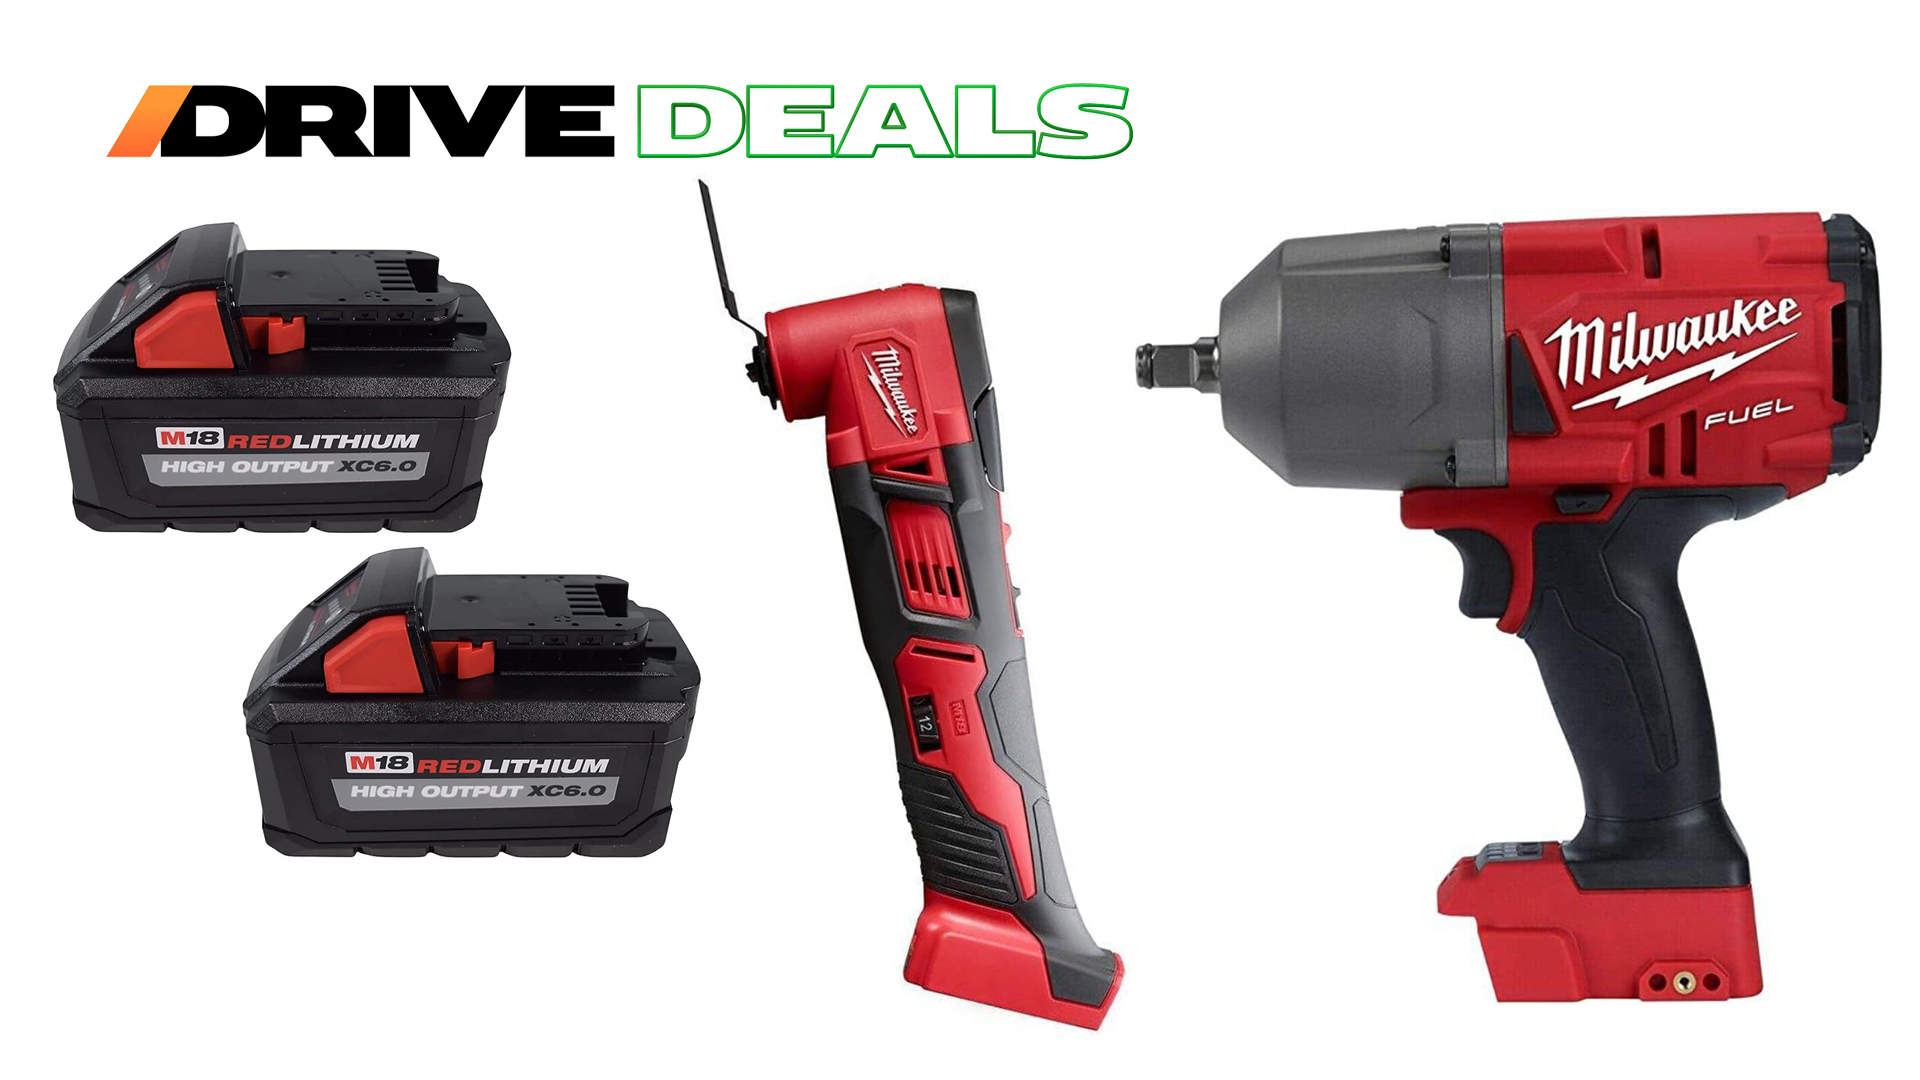 Prime Day Is Here With Huge Savings On Milwaukee Power Tools